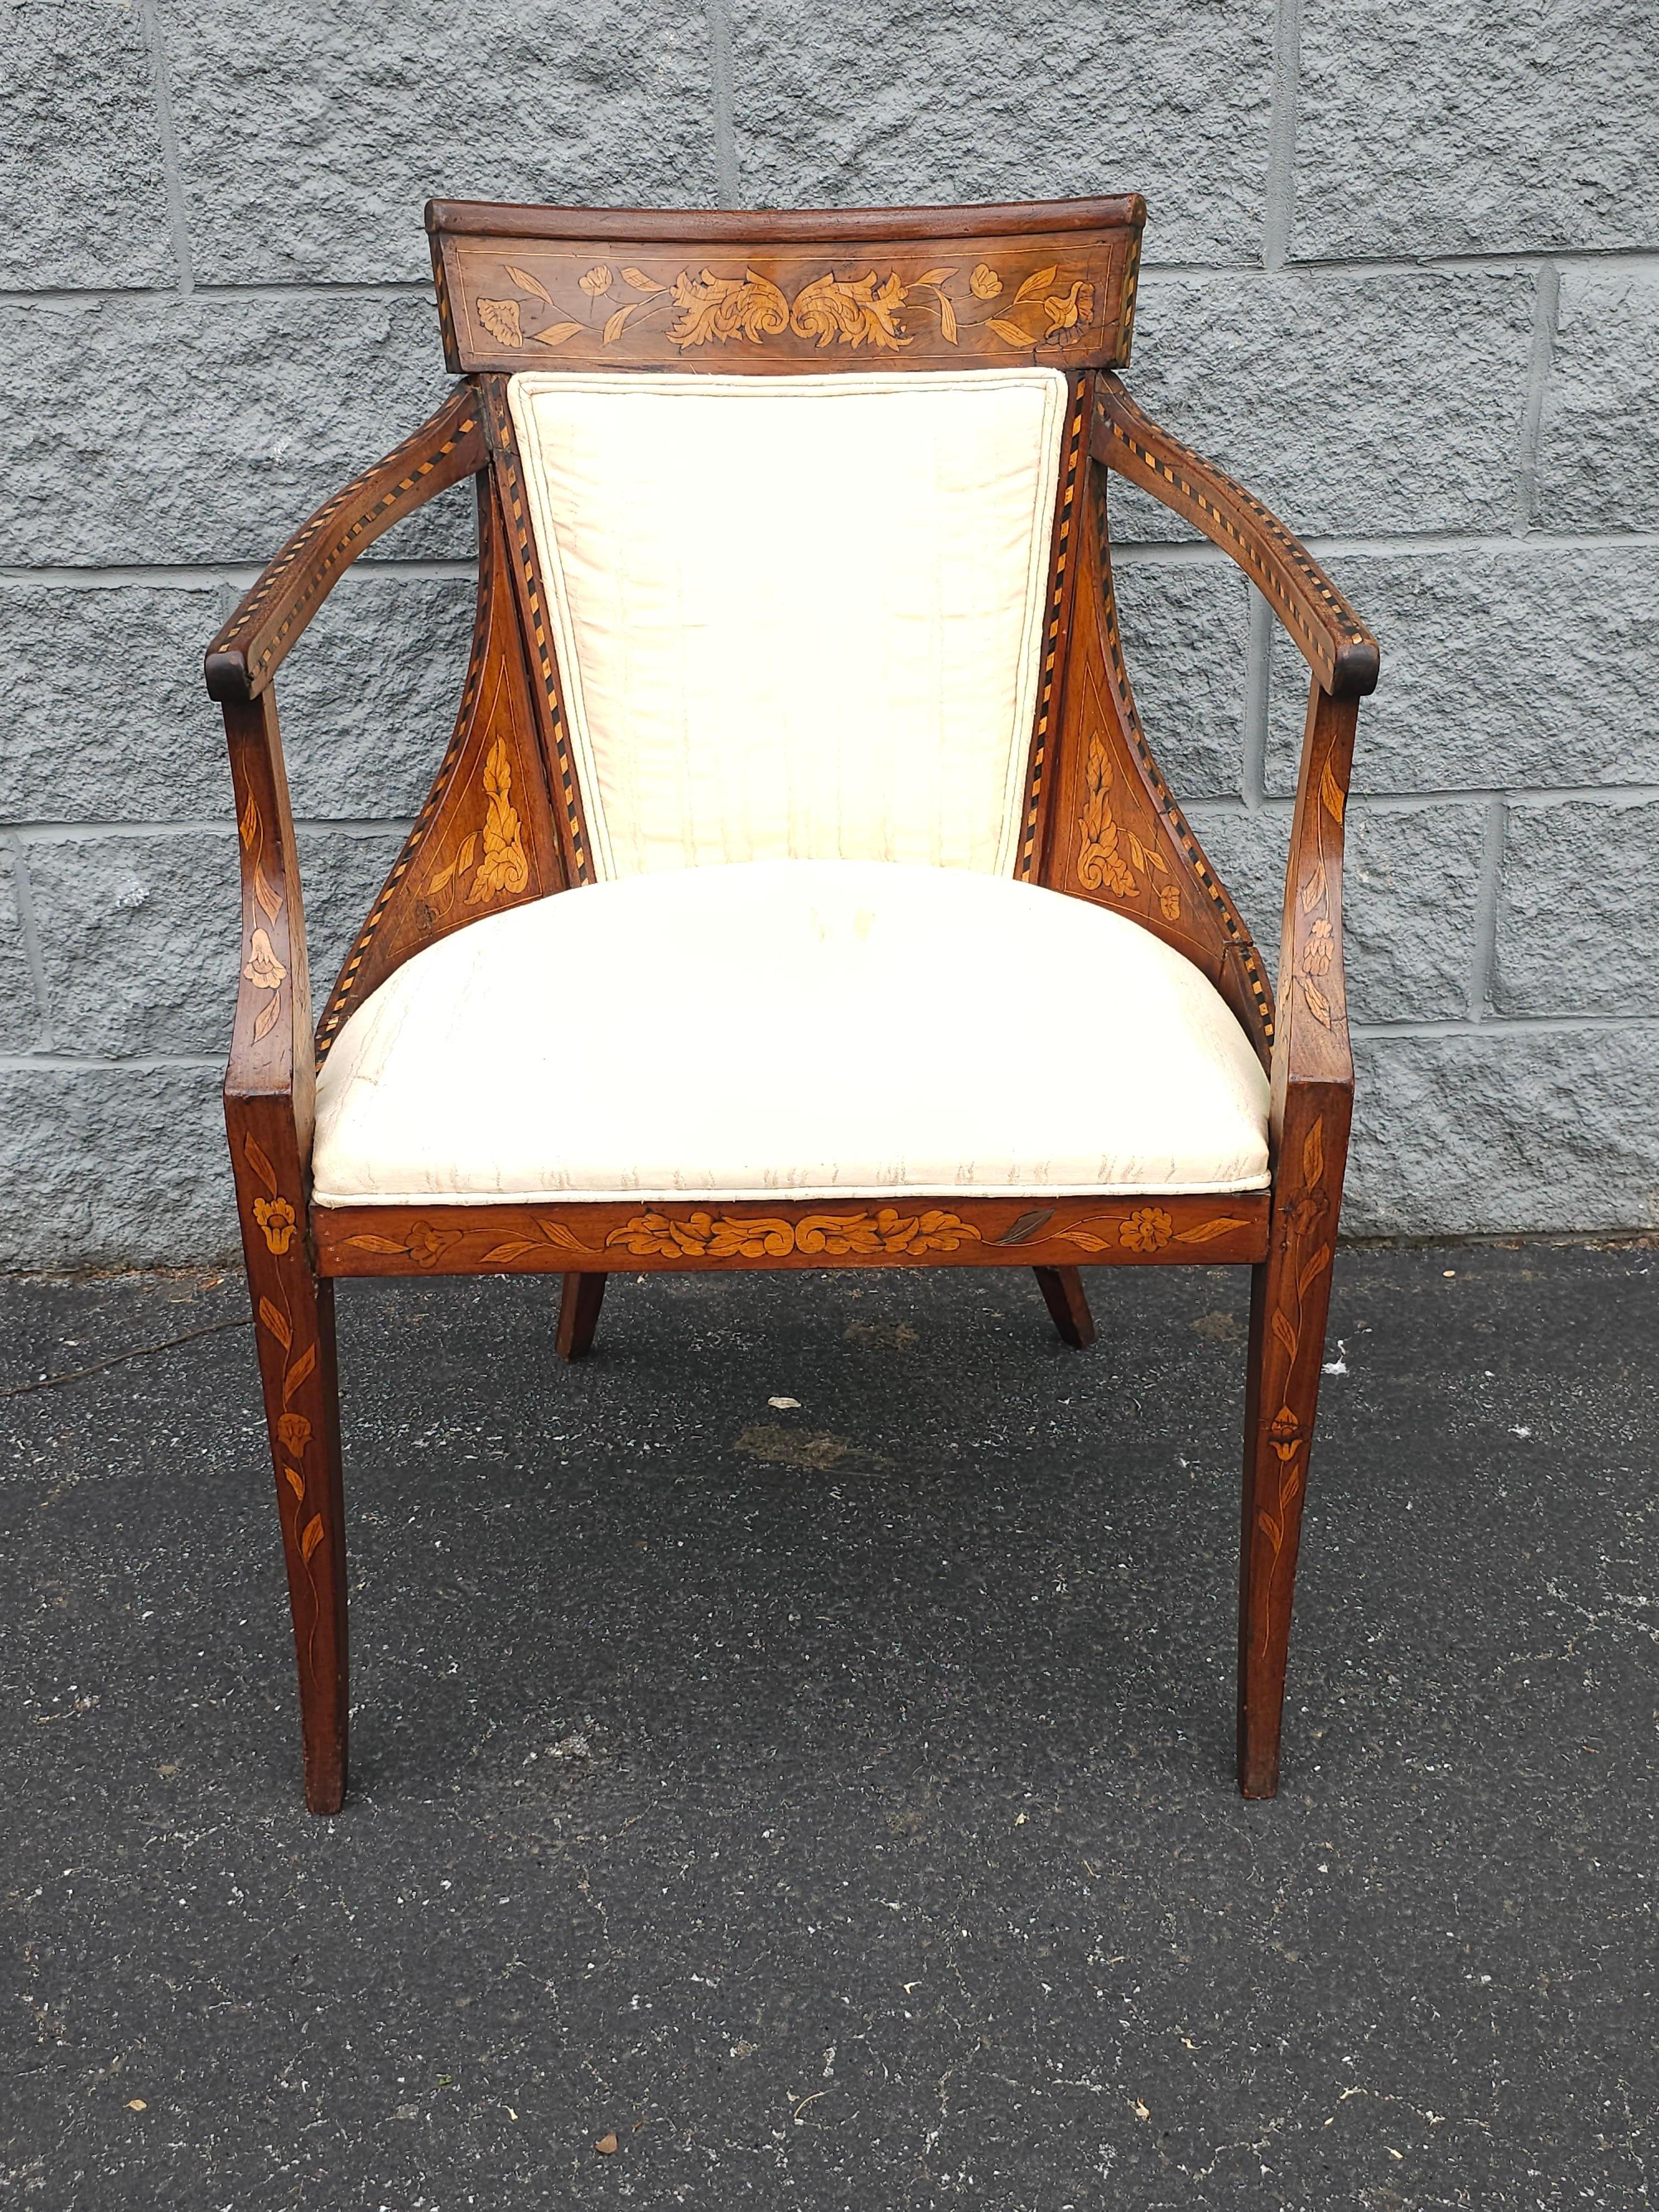 An 18th Century Neoclassical Dutch Marquetry Satinwood inlays And Upholstered Armchair. Frame in good antique condition. Need new upholstery. We can have it Reupholstered to suit your desired decor.  Measures 24.75